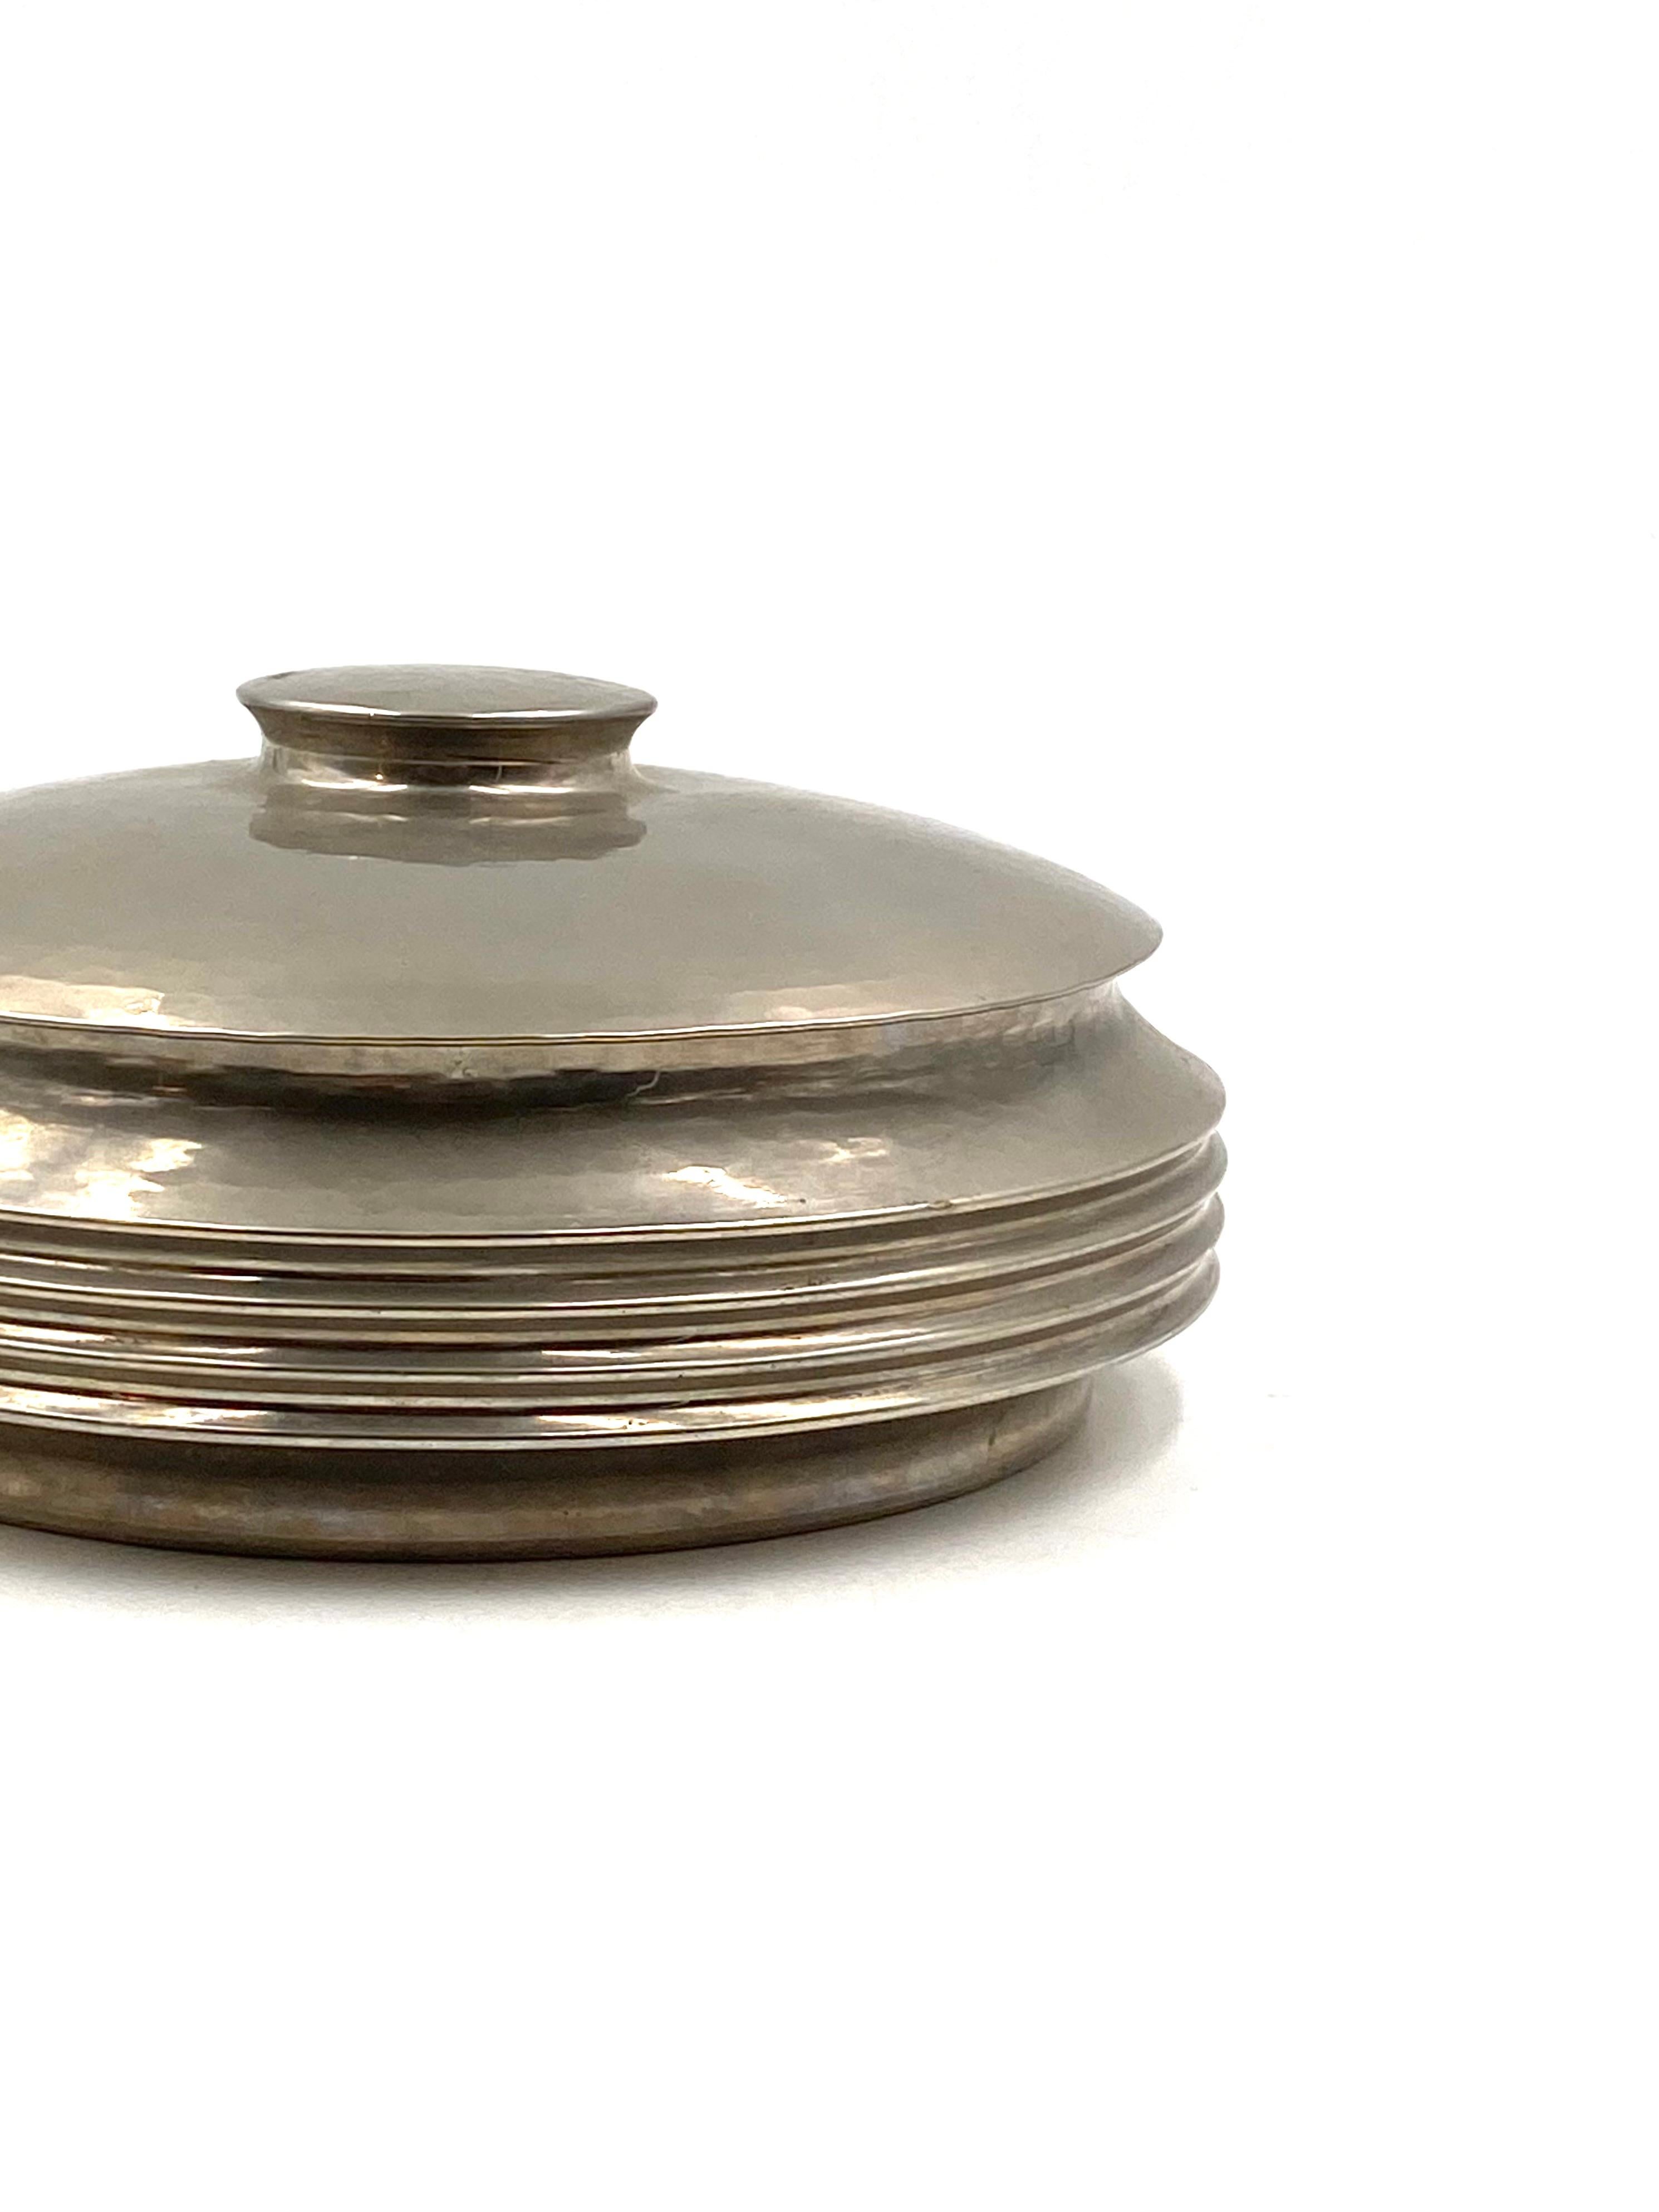 Midcentury silver-plated hand-hammered brass box, Zanetto Padova Italy 1970s For Sale 2